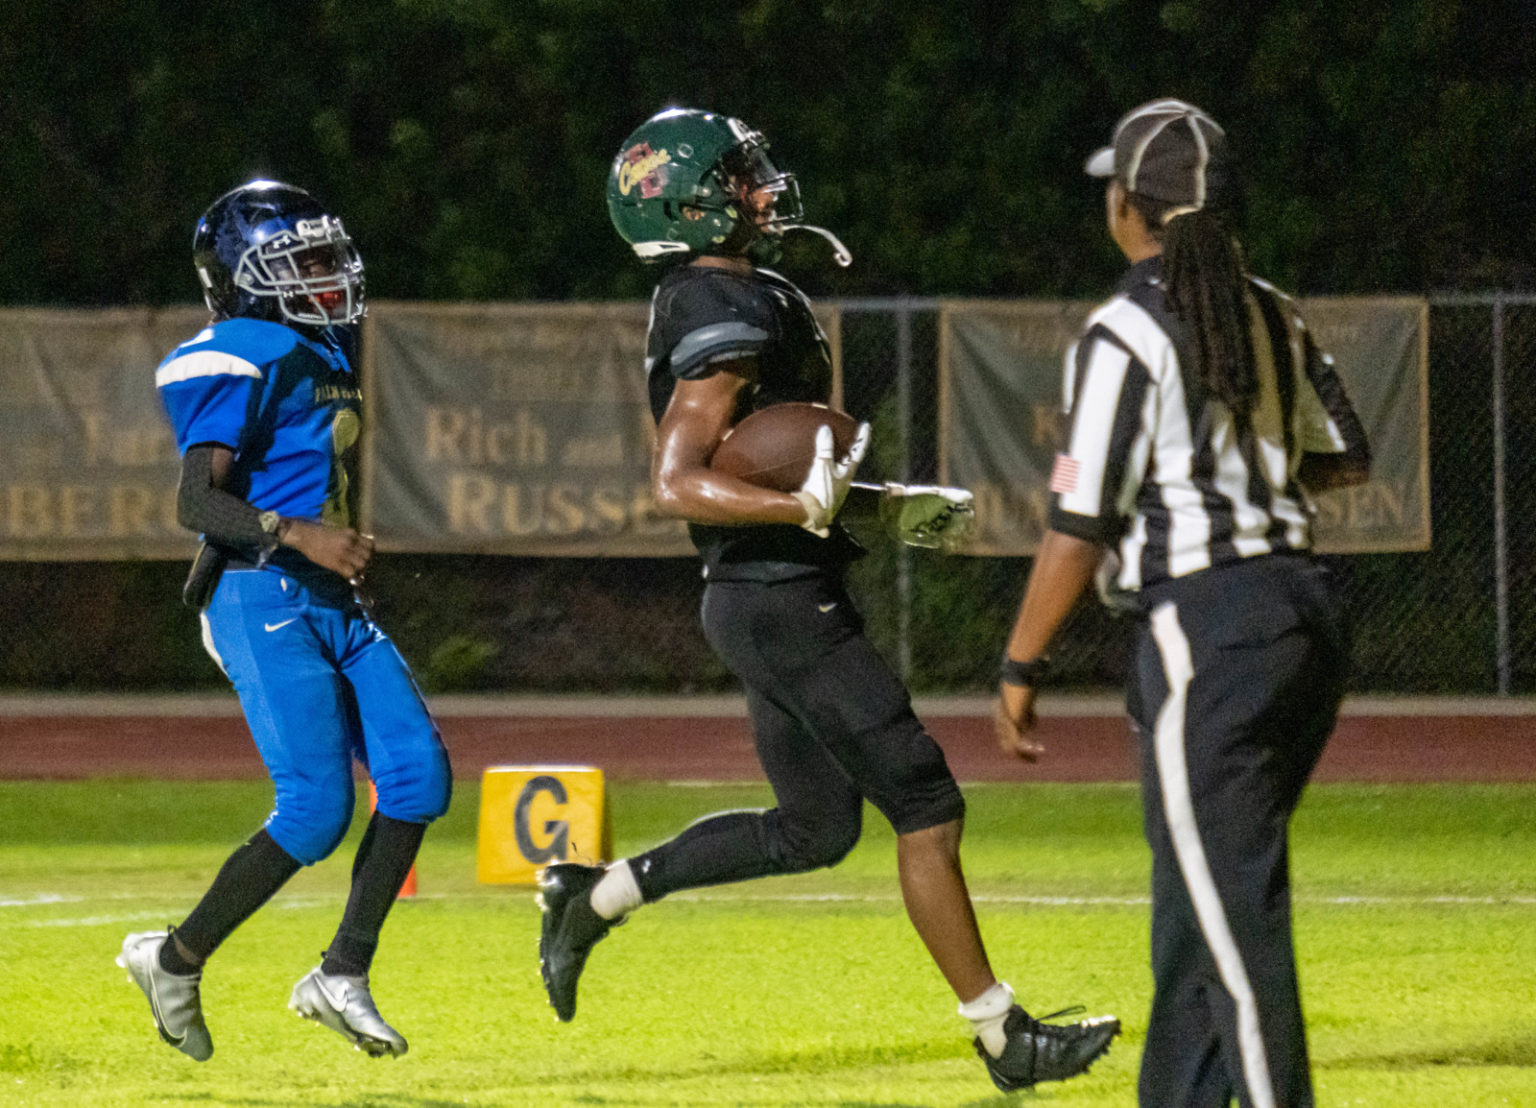 IN PICTURES ’CANES VARSITY FOOTBALL CLOBBERS PALM GLADES